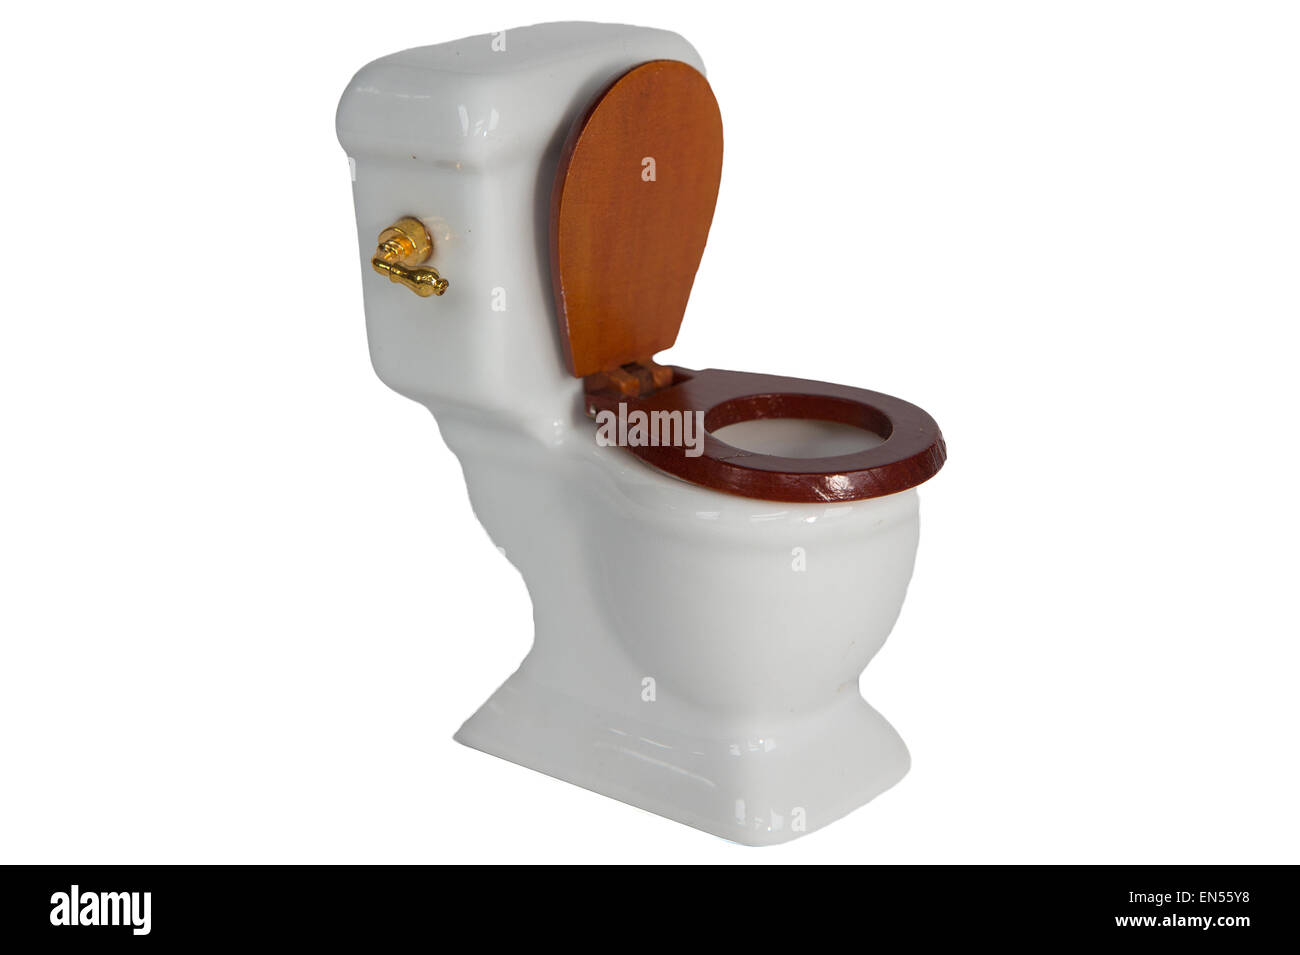 Wc Flushing High Resolution Stock Photography and Images - Alamy